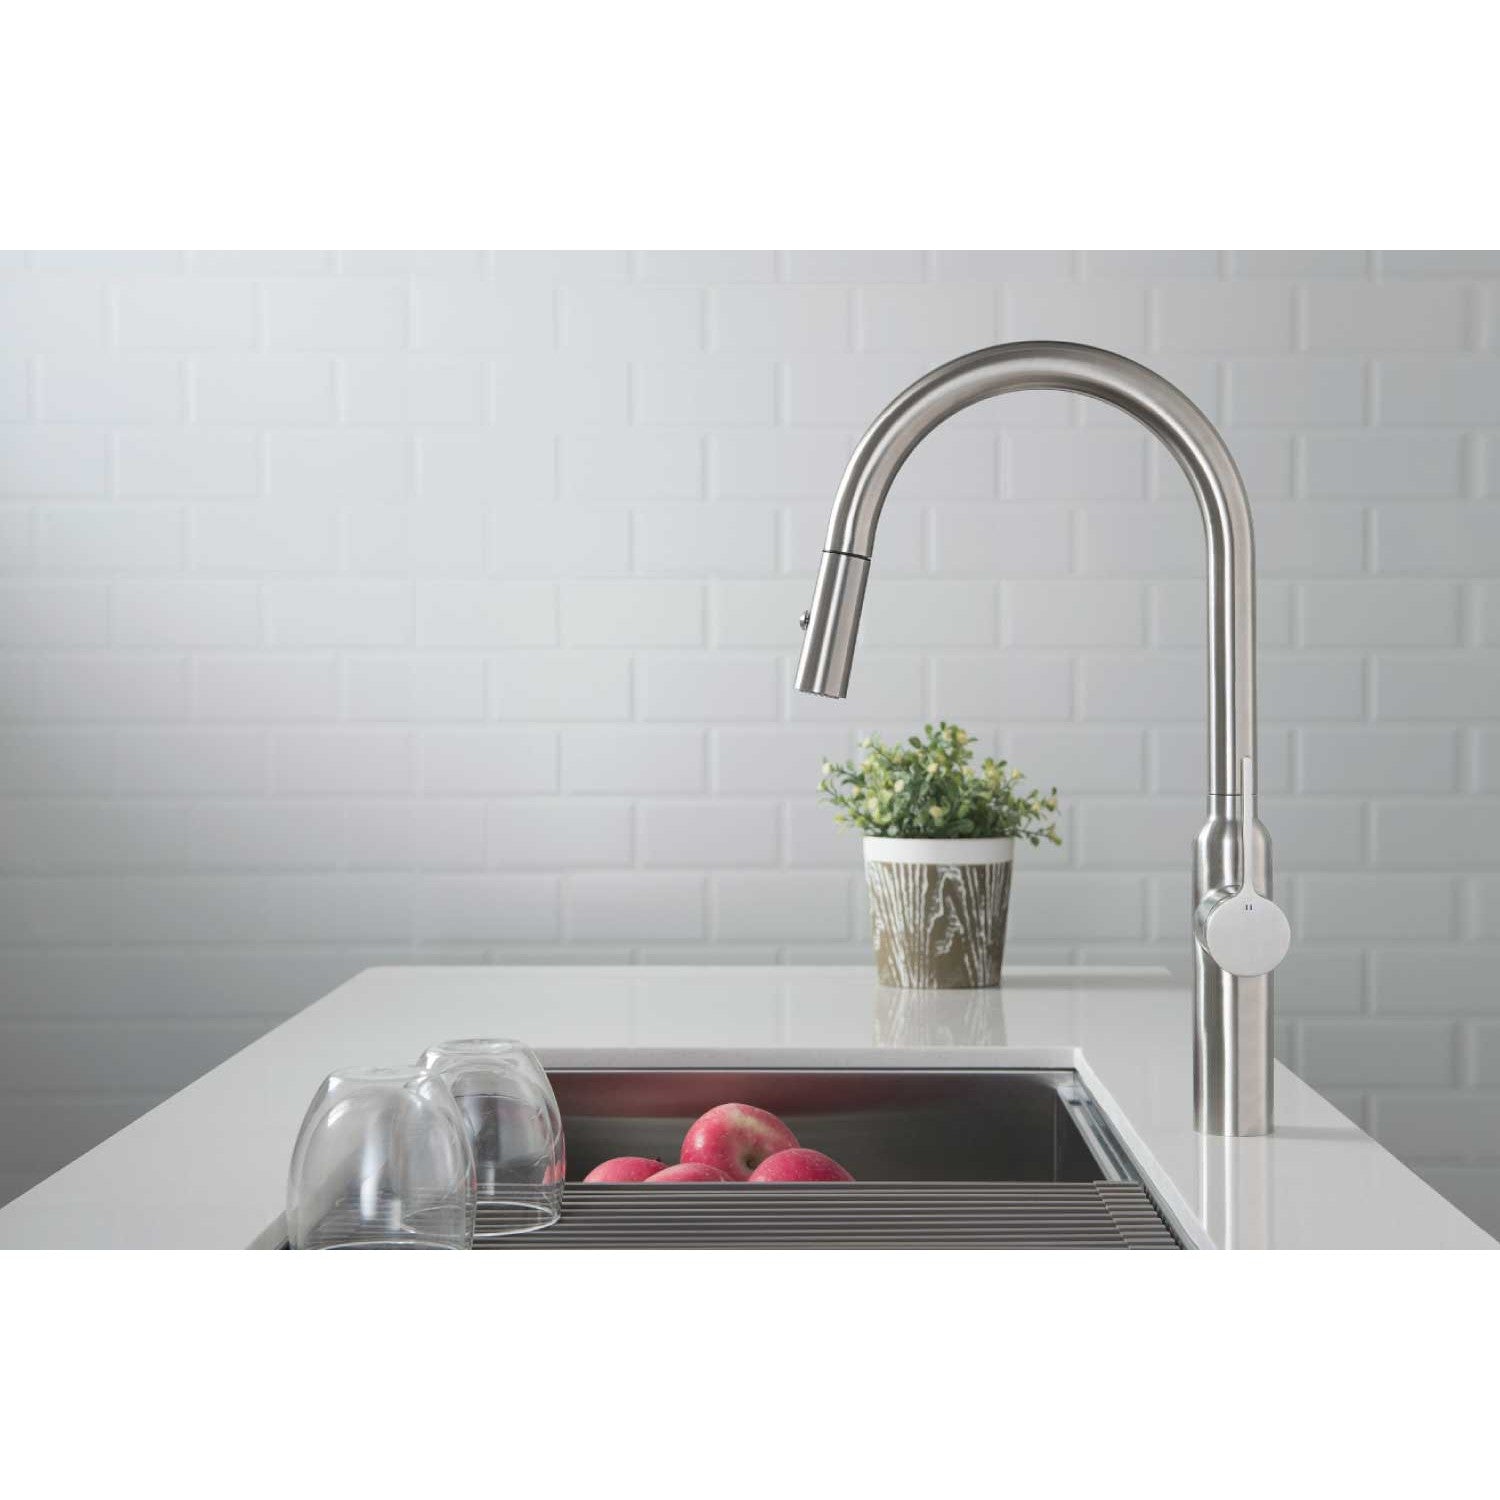 Isenberg Klassiker Ziel 17" Single Hole Blue Platinum Stainless Steel Pull-Down Kitchen Faucet With Dual Function Sprayer